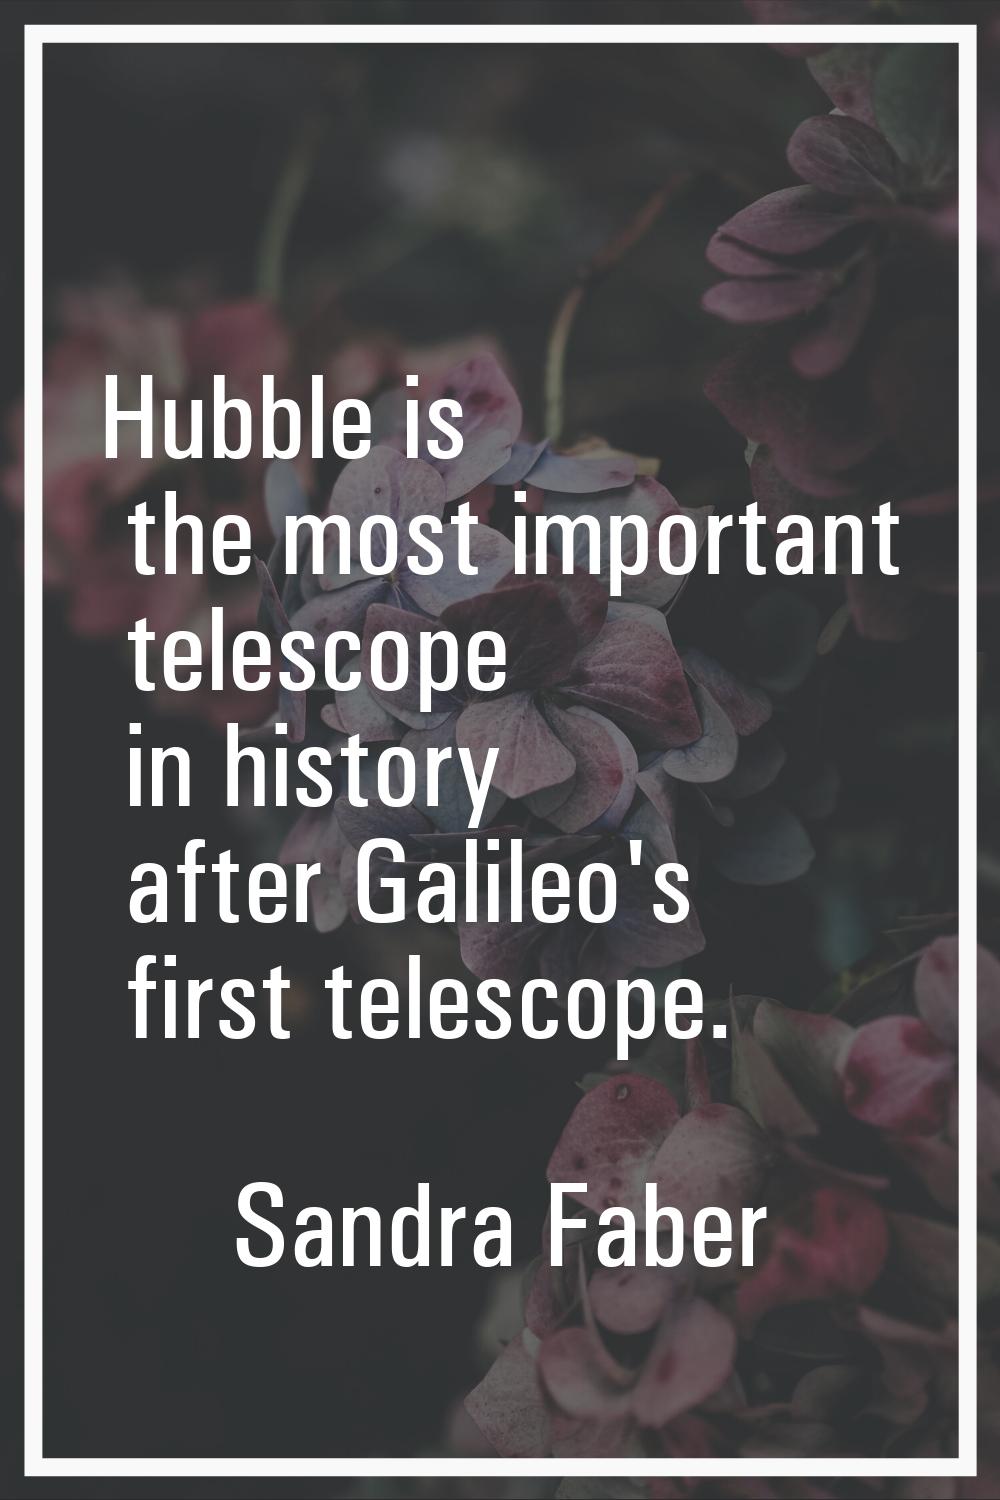 Hubble is the most important telescope in history after Galileo's first telescope.